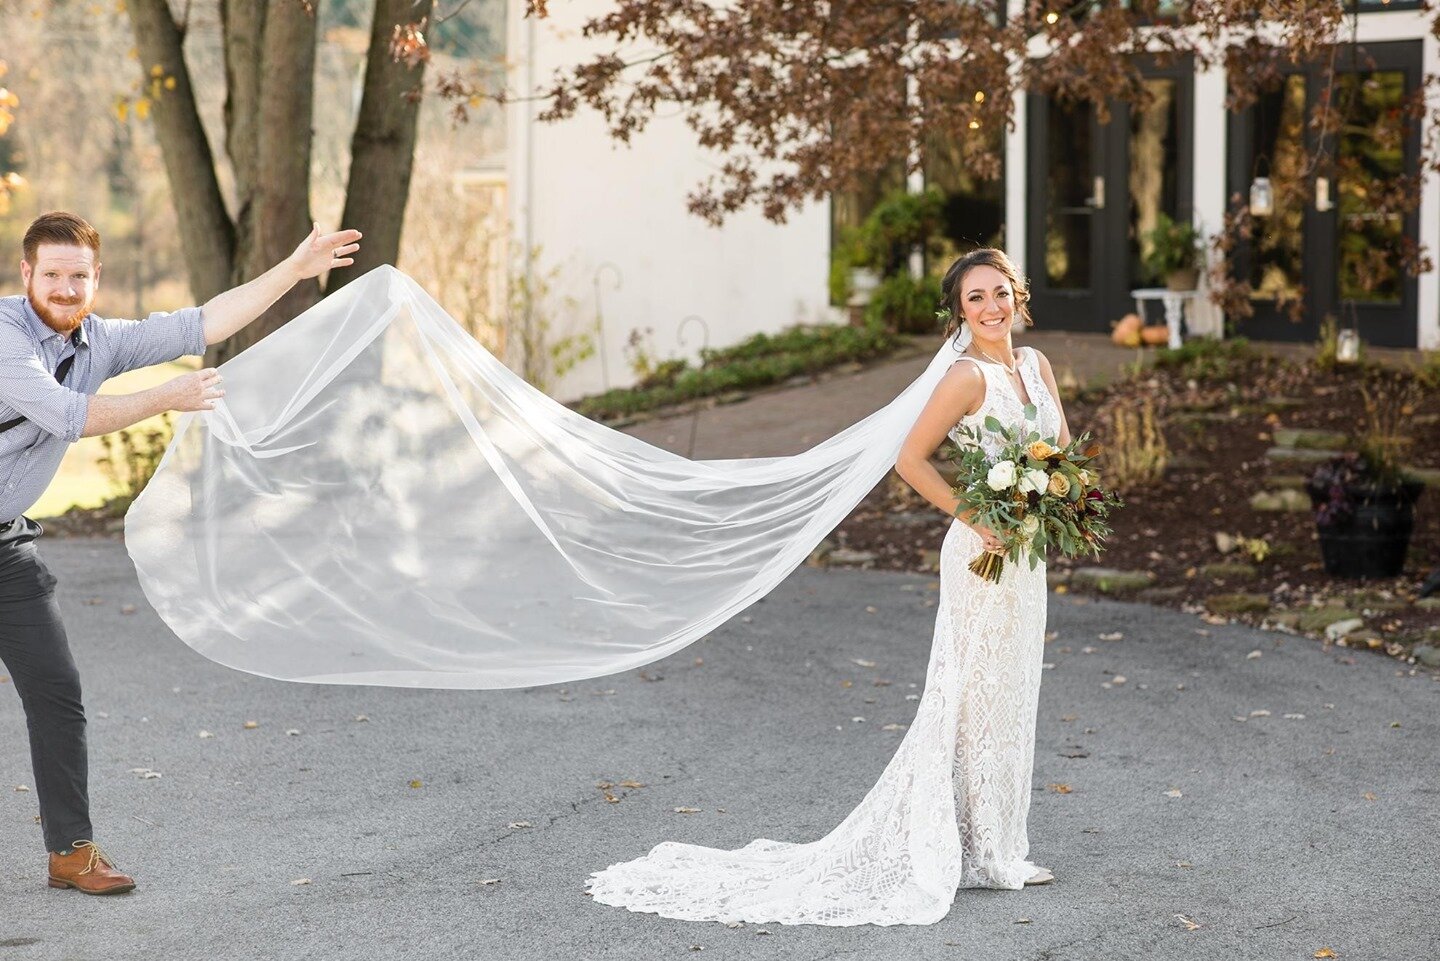 This is how those flowy veil shots REALLY come to life!